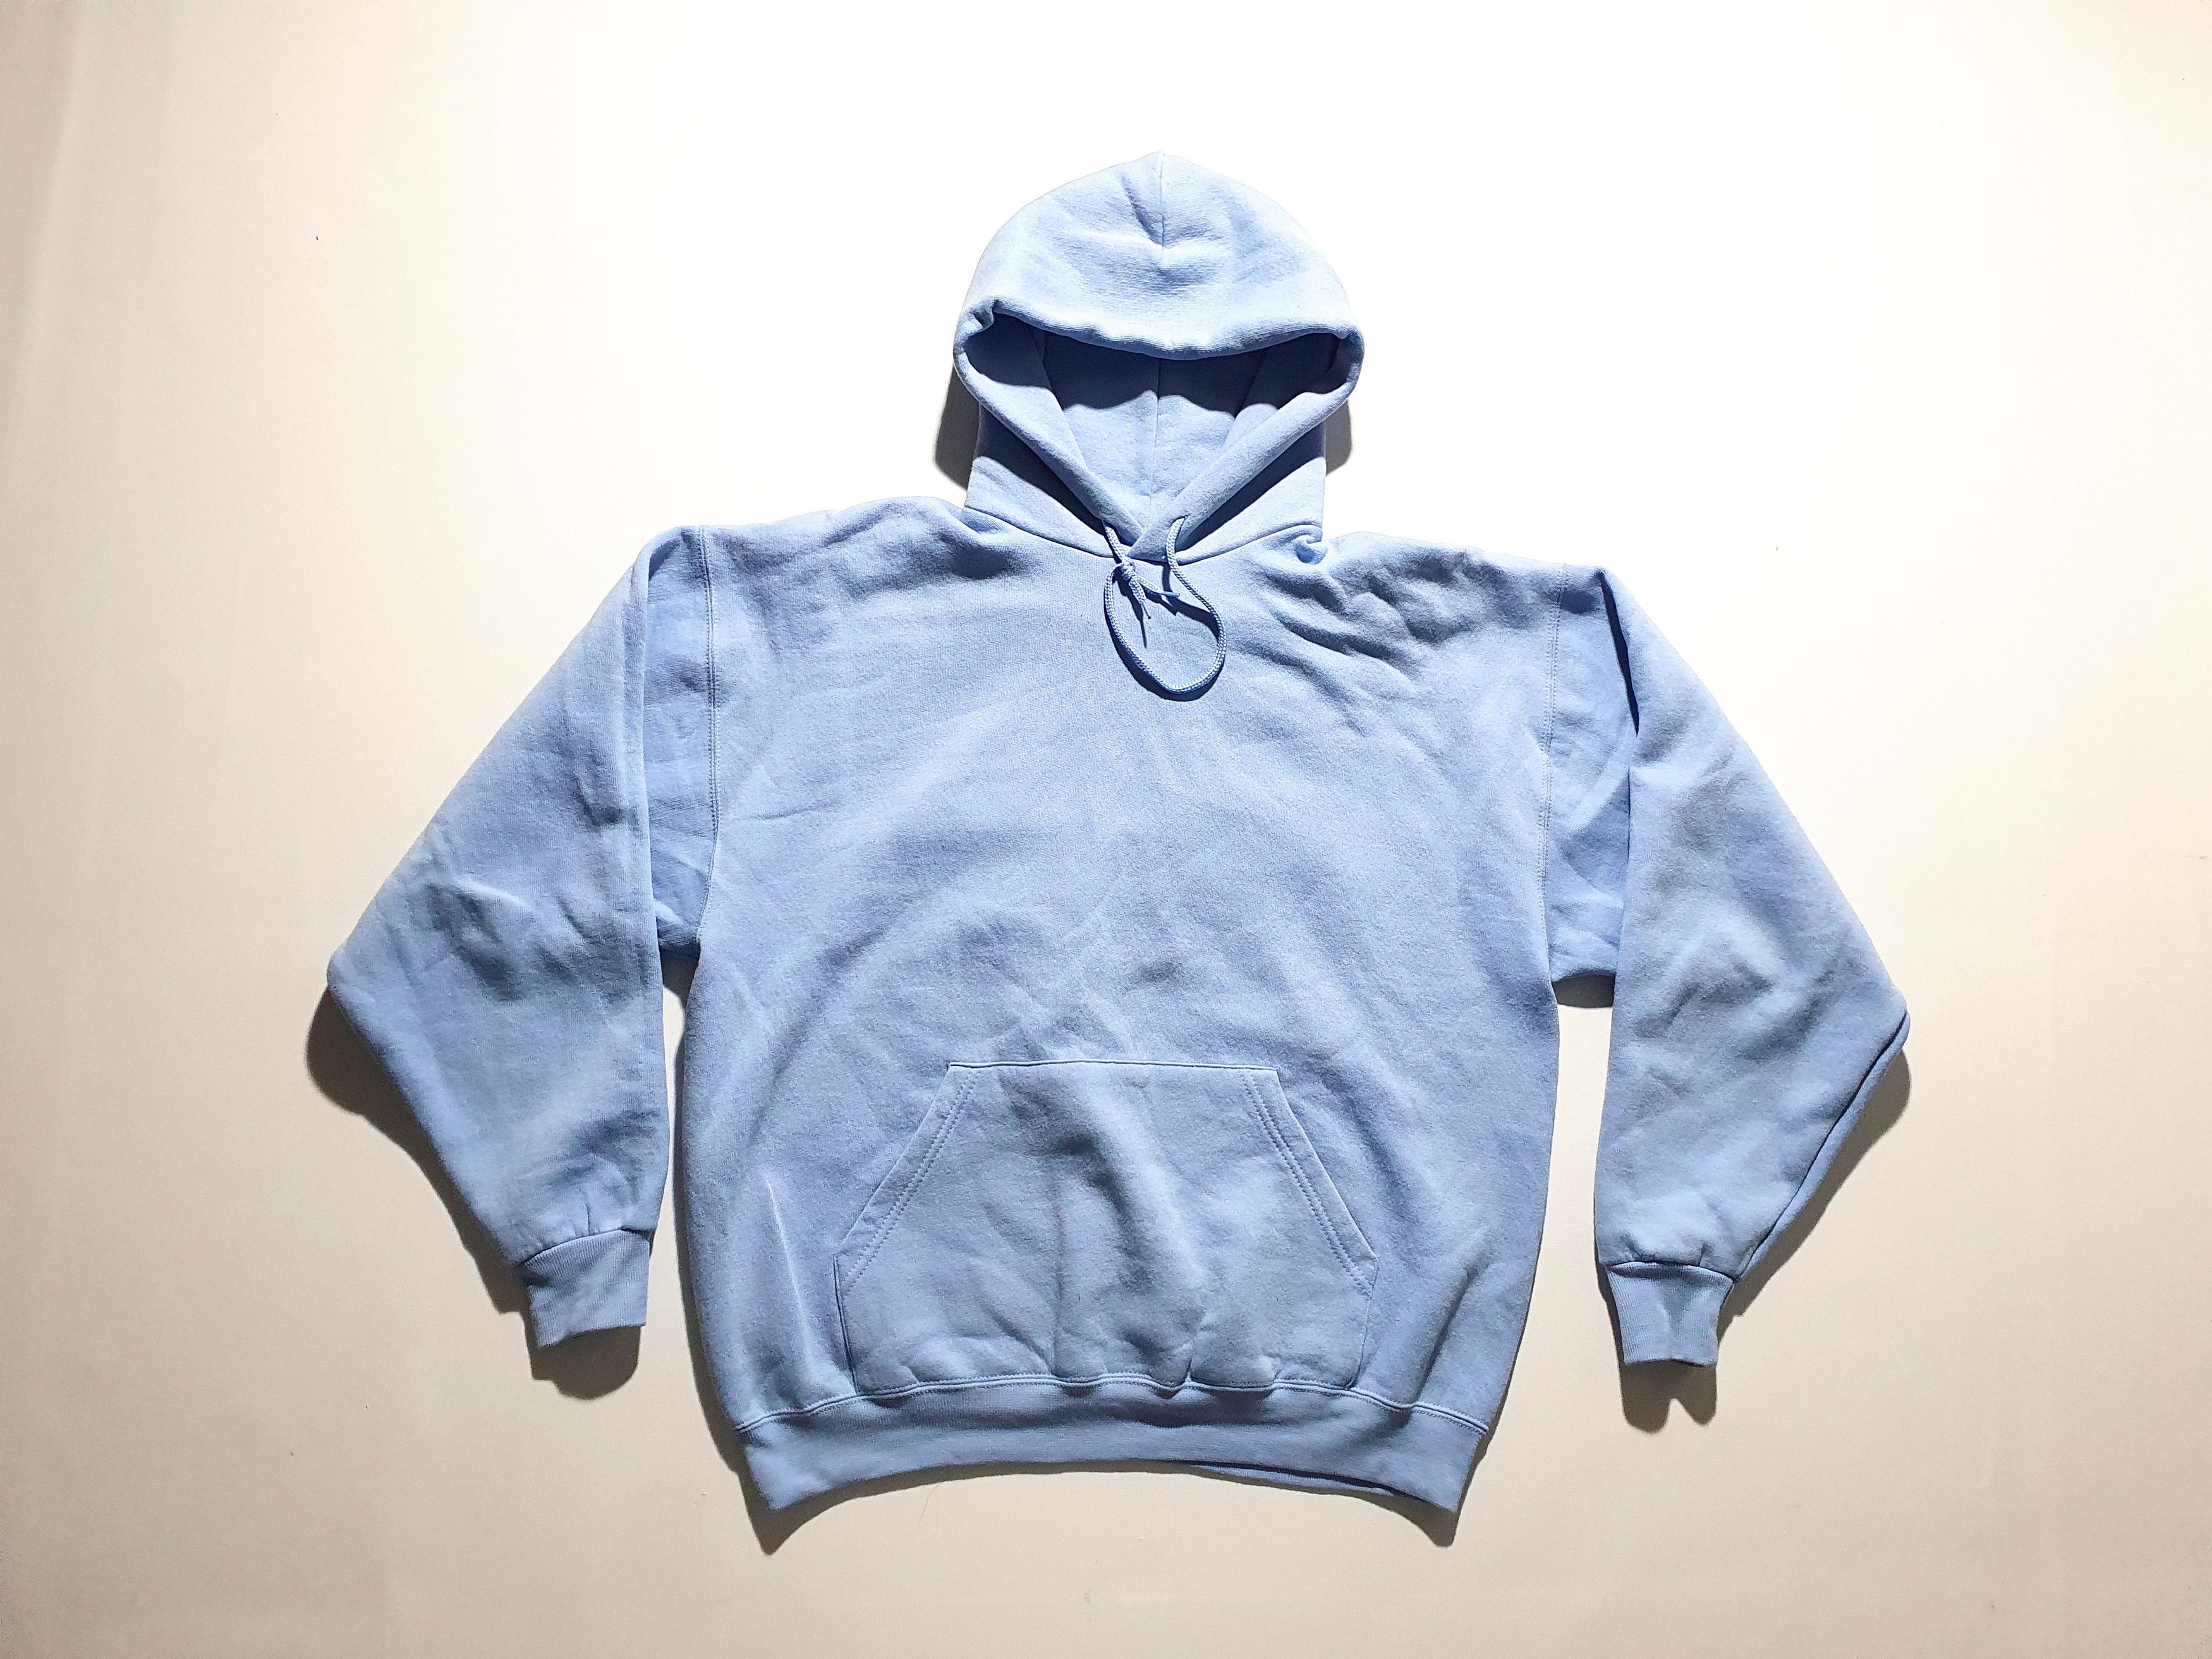 Russell Athletic Rare Russell Baby Blue Hoodie no logo Kanye West Size US L / EU 52-54 / 3 - 5 Thumbnail